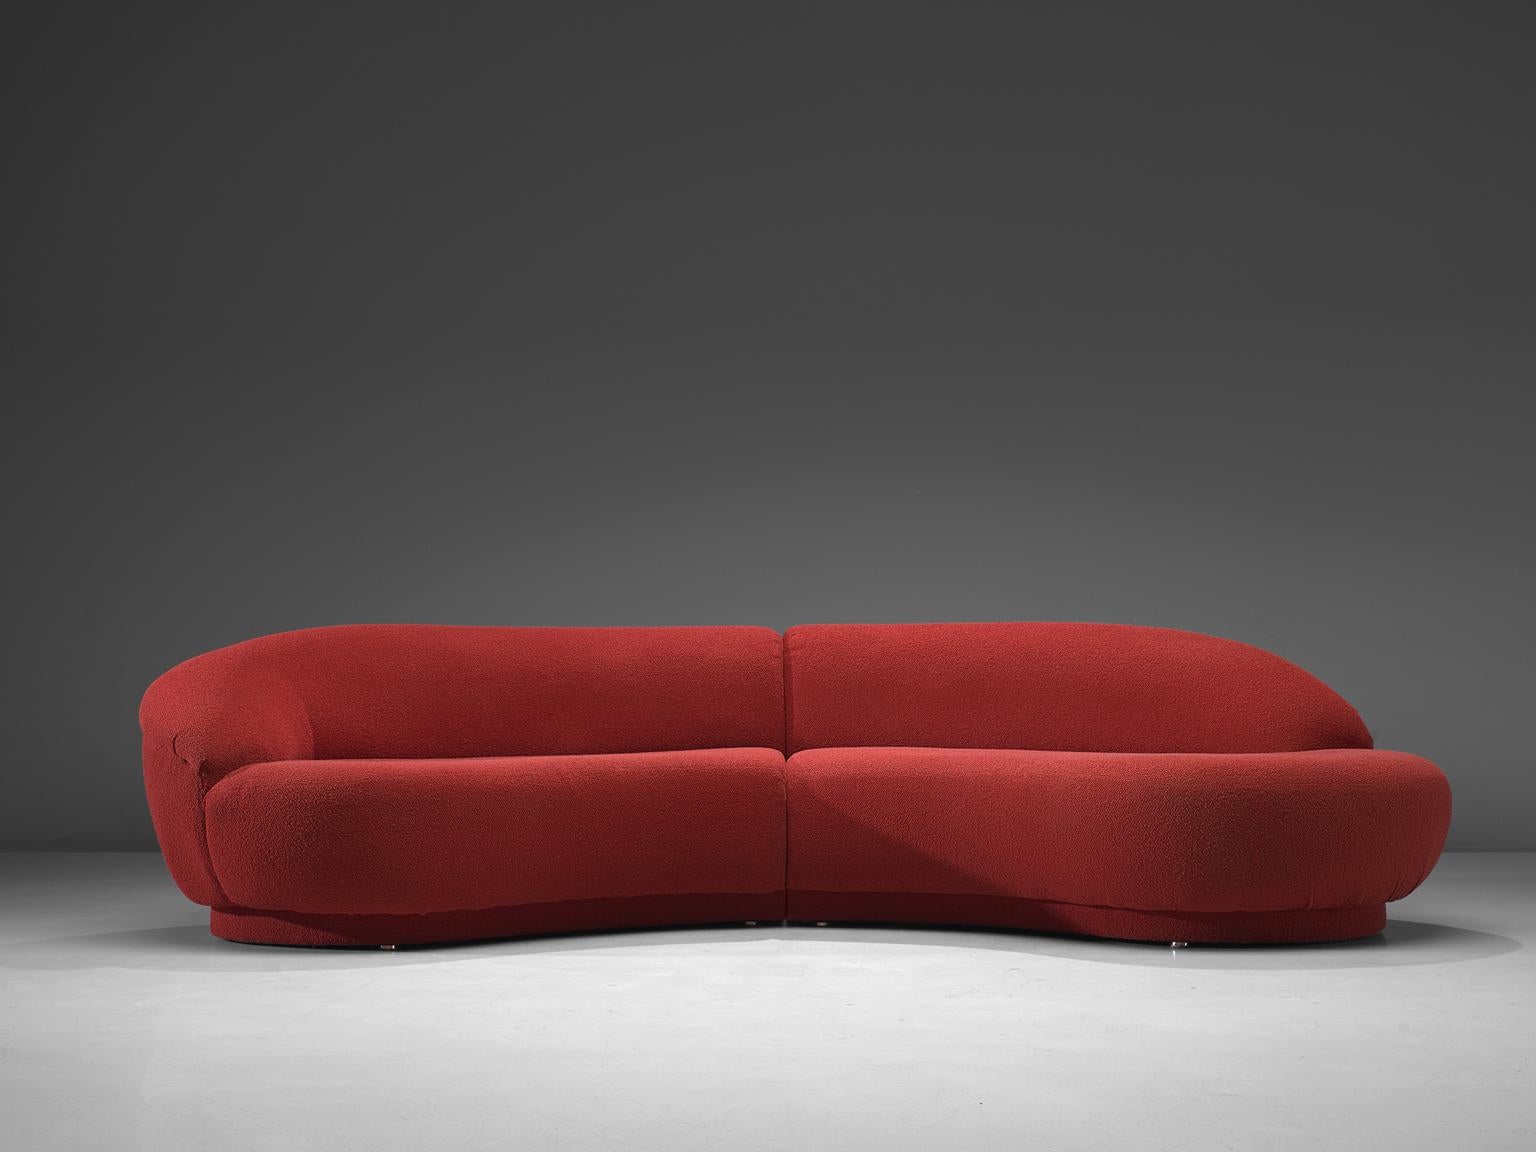 Milo Baughman for Thayer-Coggin, two-piece Serpentine sectional curved sofa, United States, 1970s.

This outstanding Milo Baughman two-piece Serpentine sectional curved sofa is a wonderful example of Baughman's design skills. This sofa comes with